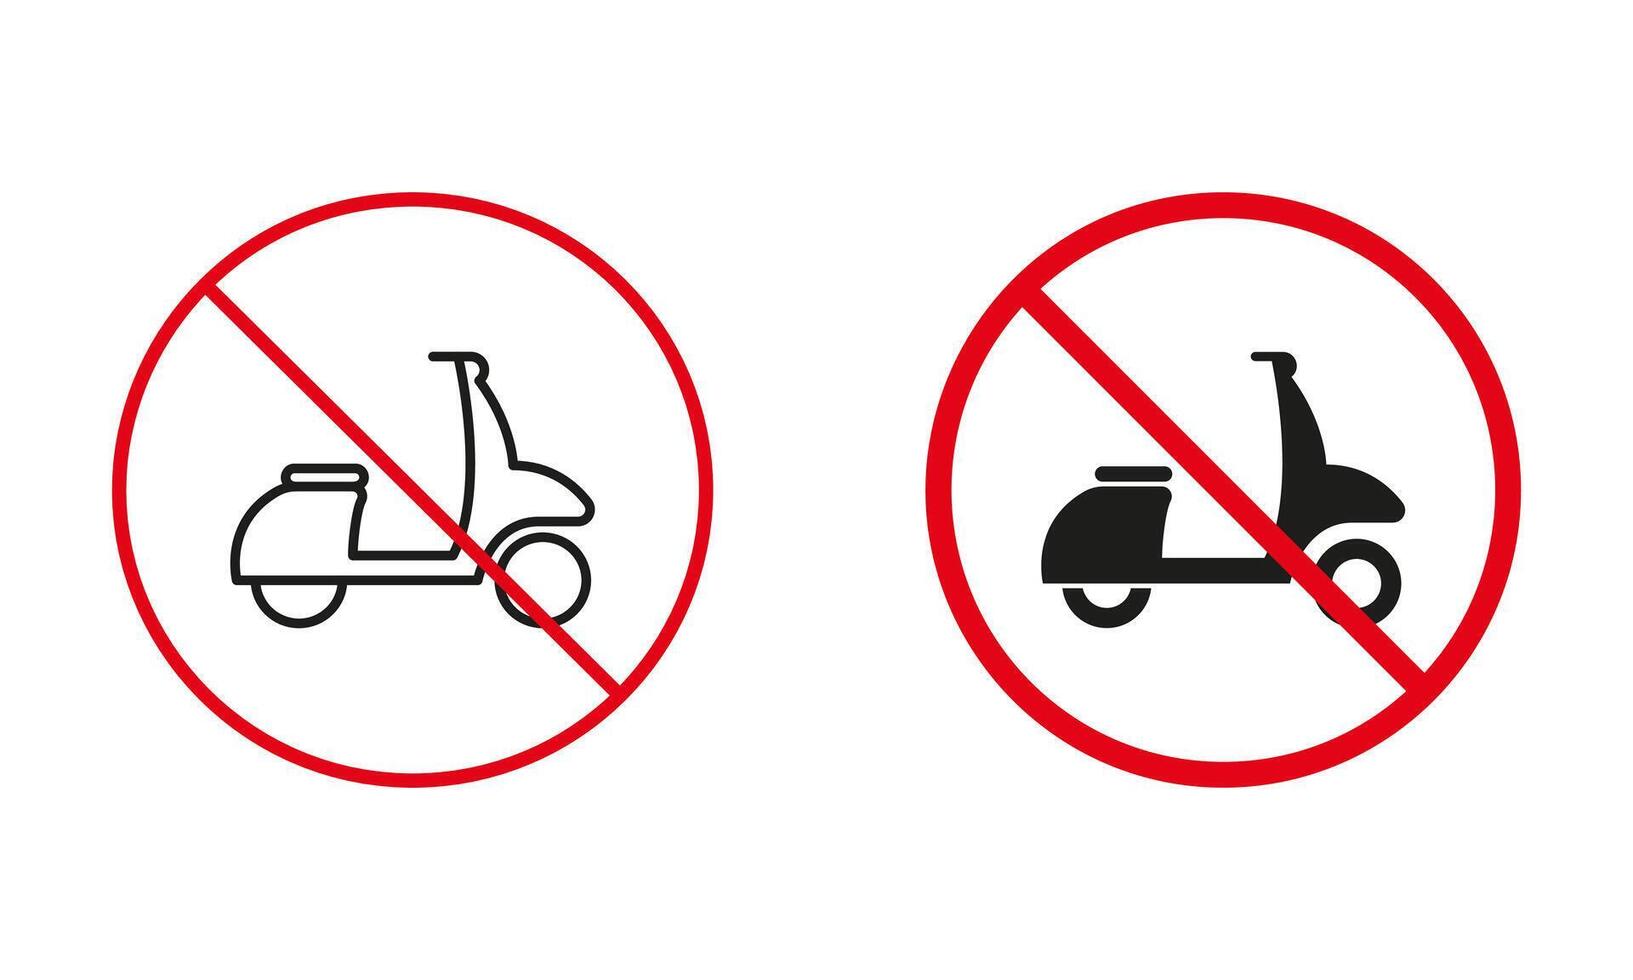 Prohibited Moped Road Prohibit Sign. No Delivery Zone Symbol Set. Not Allowed Fast Motorcycle, Scooter, Motor Bike Line and Silhouette Icons. Isolated Illustration vector